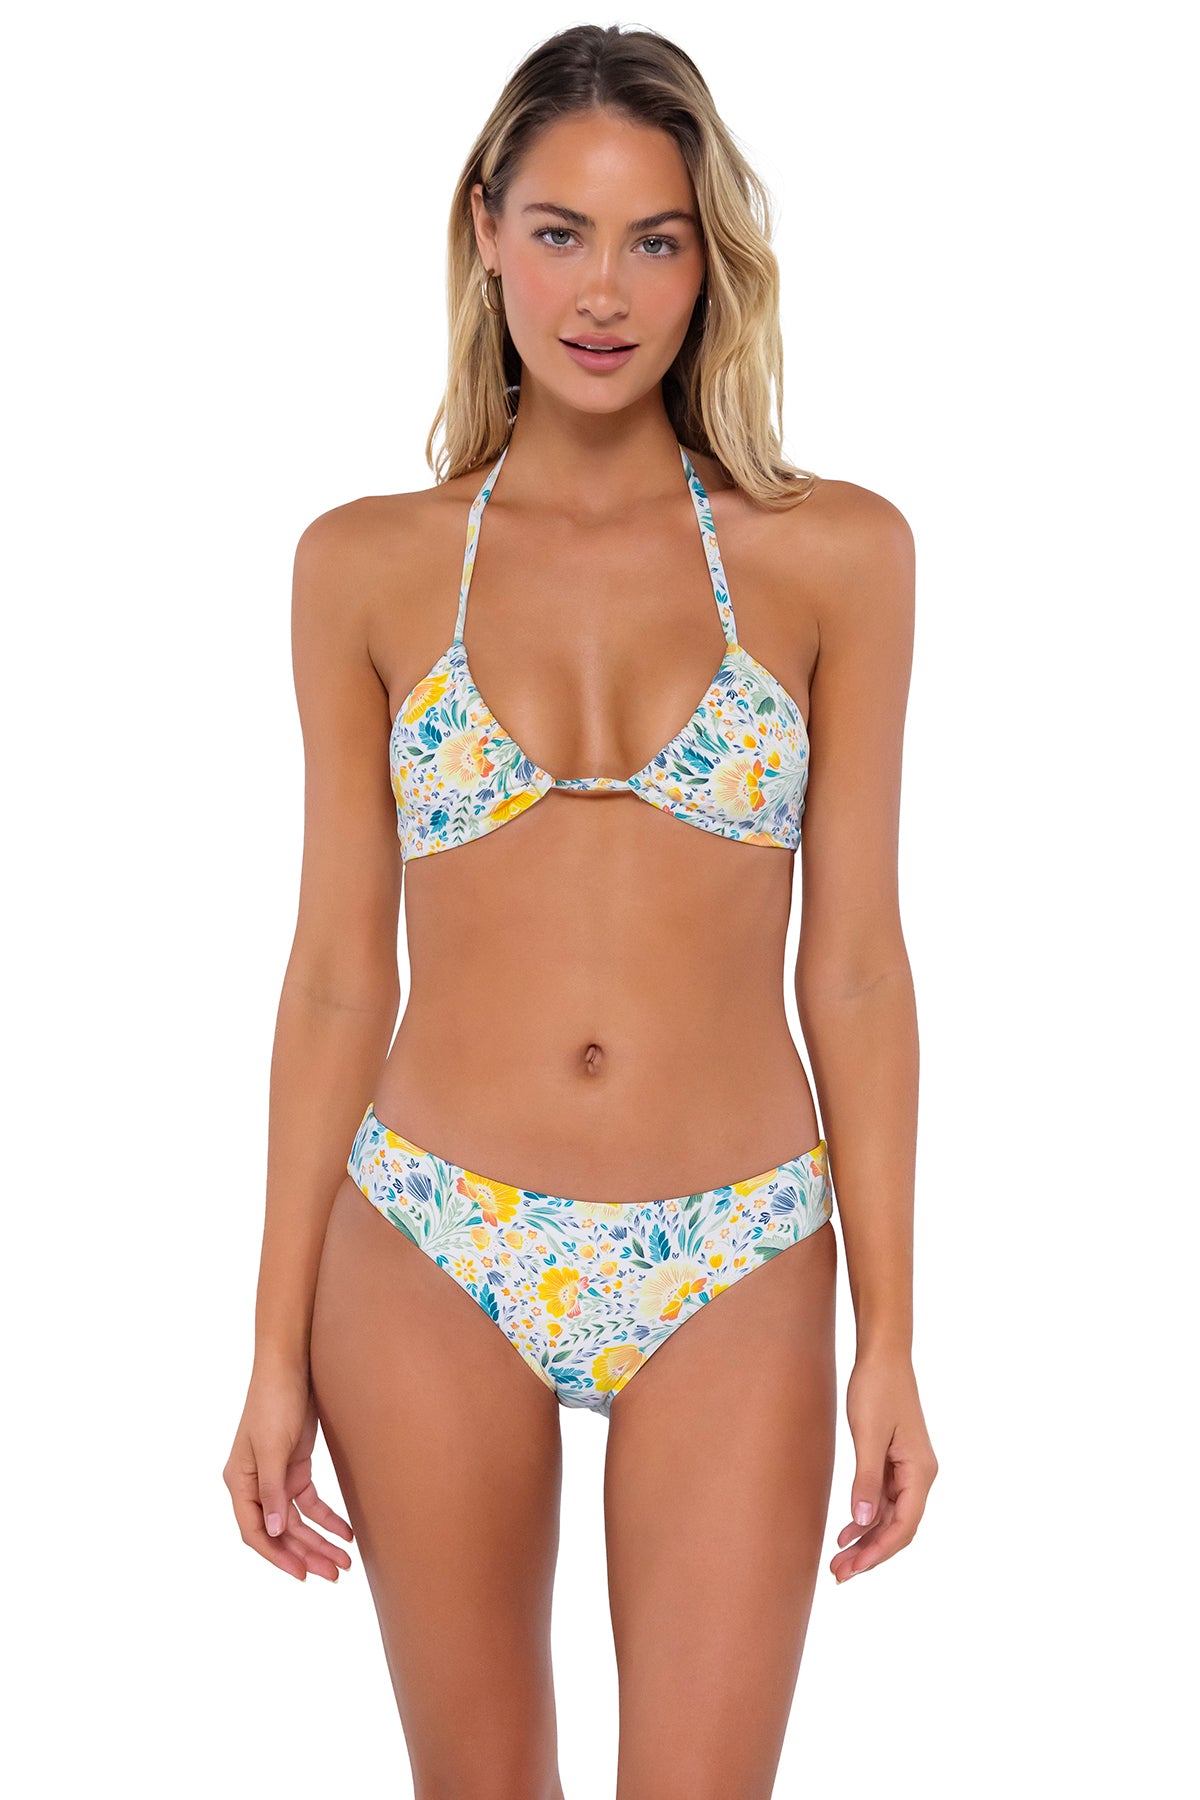 Front pose #1 of Jessica wearing Swim Systems Golden Poppy Mila Triangle Top as an upside-down scoop halter with matching Chloe bikini bottom